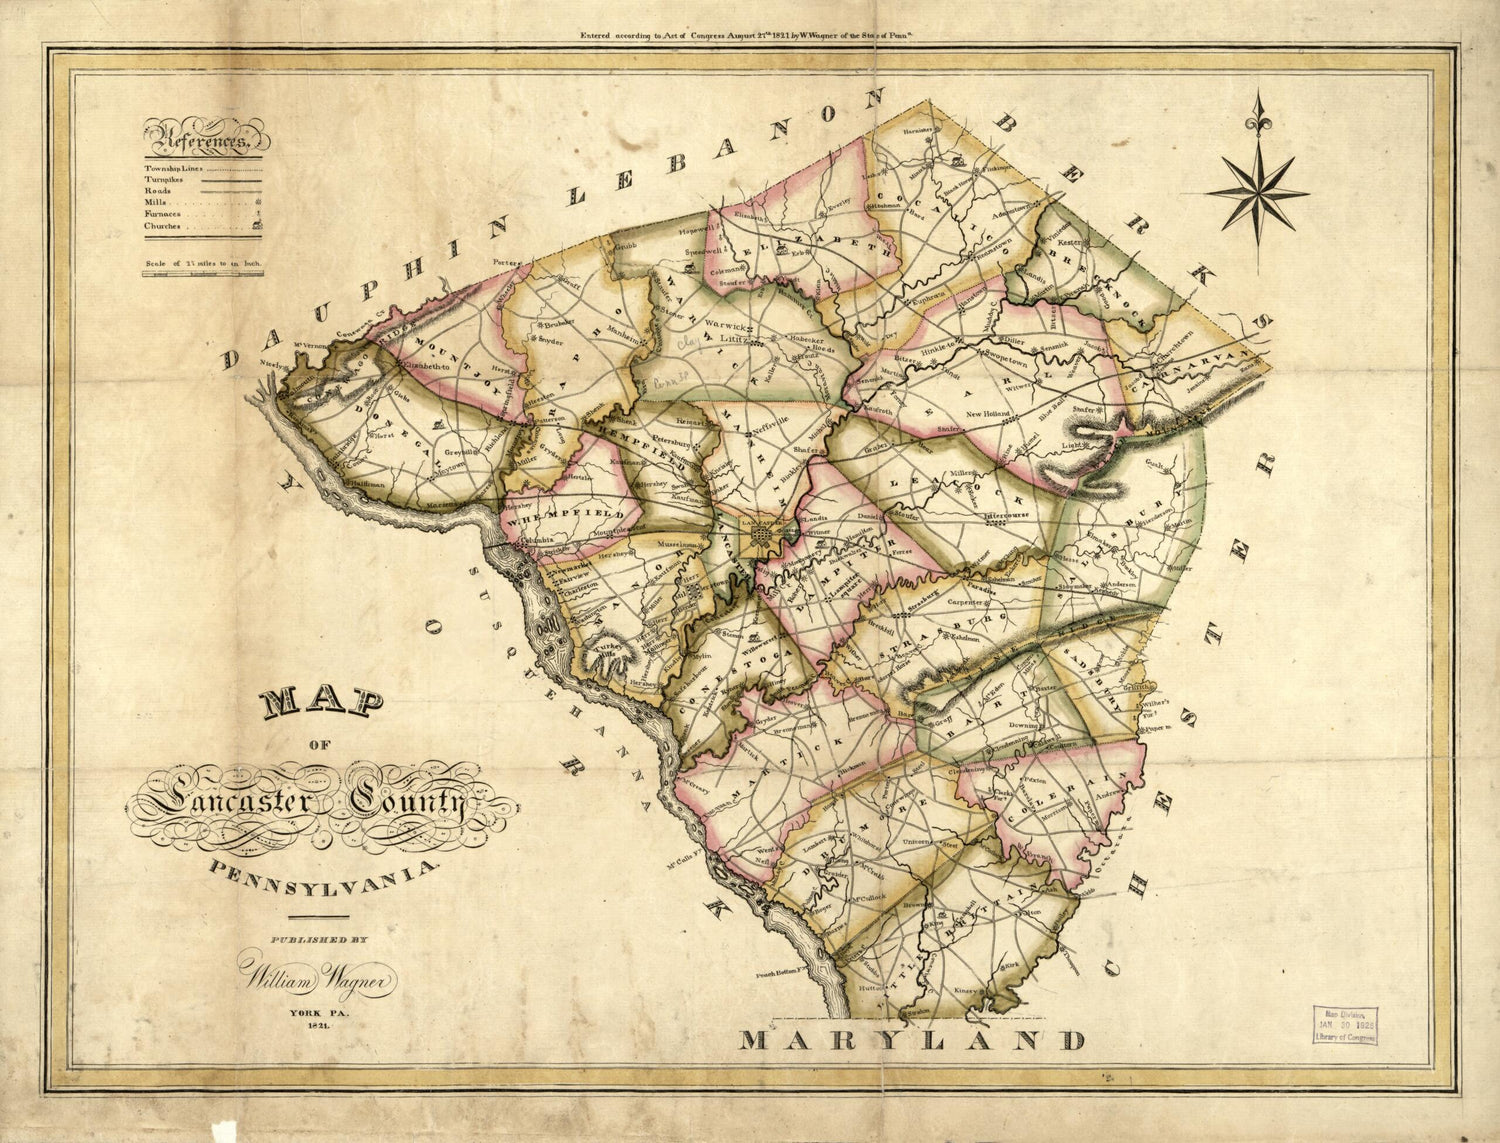 This old map of Map of Lancaster County, Pennsylvania from 1821 was created by William Wagner in 1821